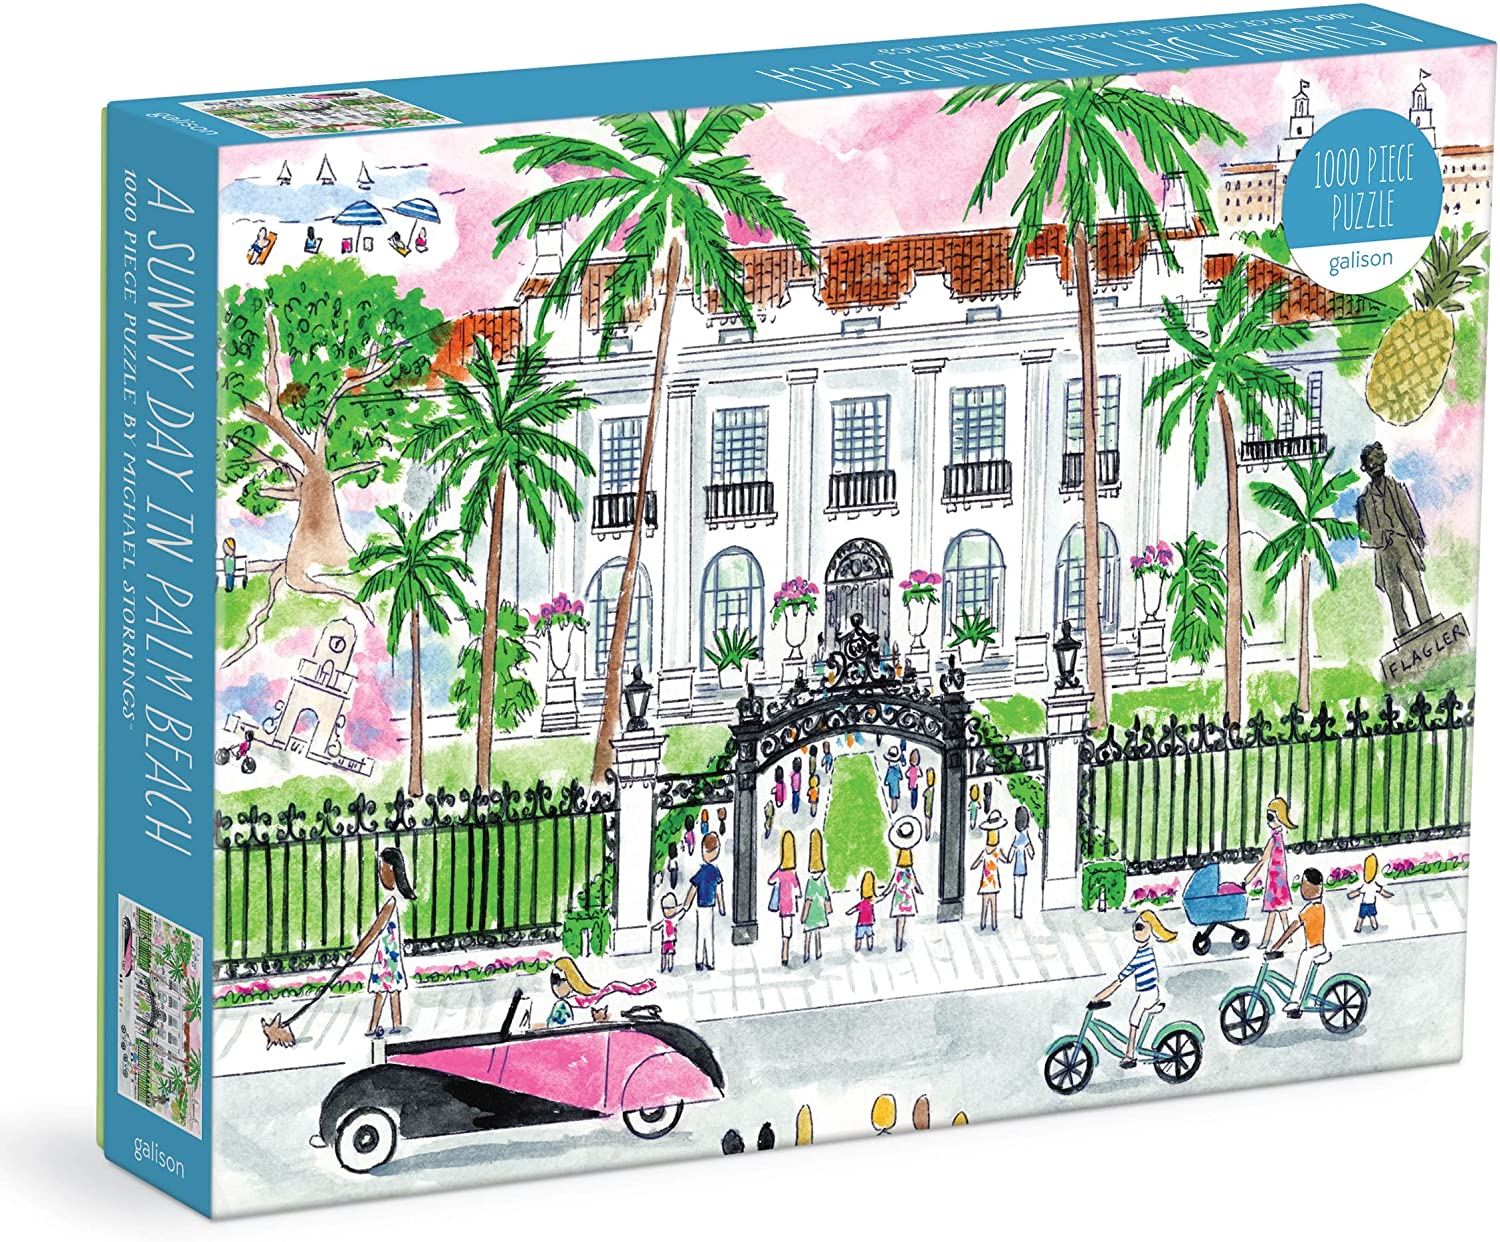 Jigsaw Puzzles for Adults -  nostalgic puzzles, scenic jigsaws and more!